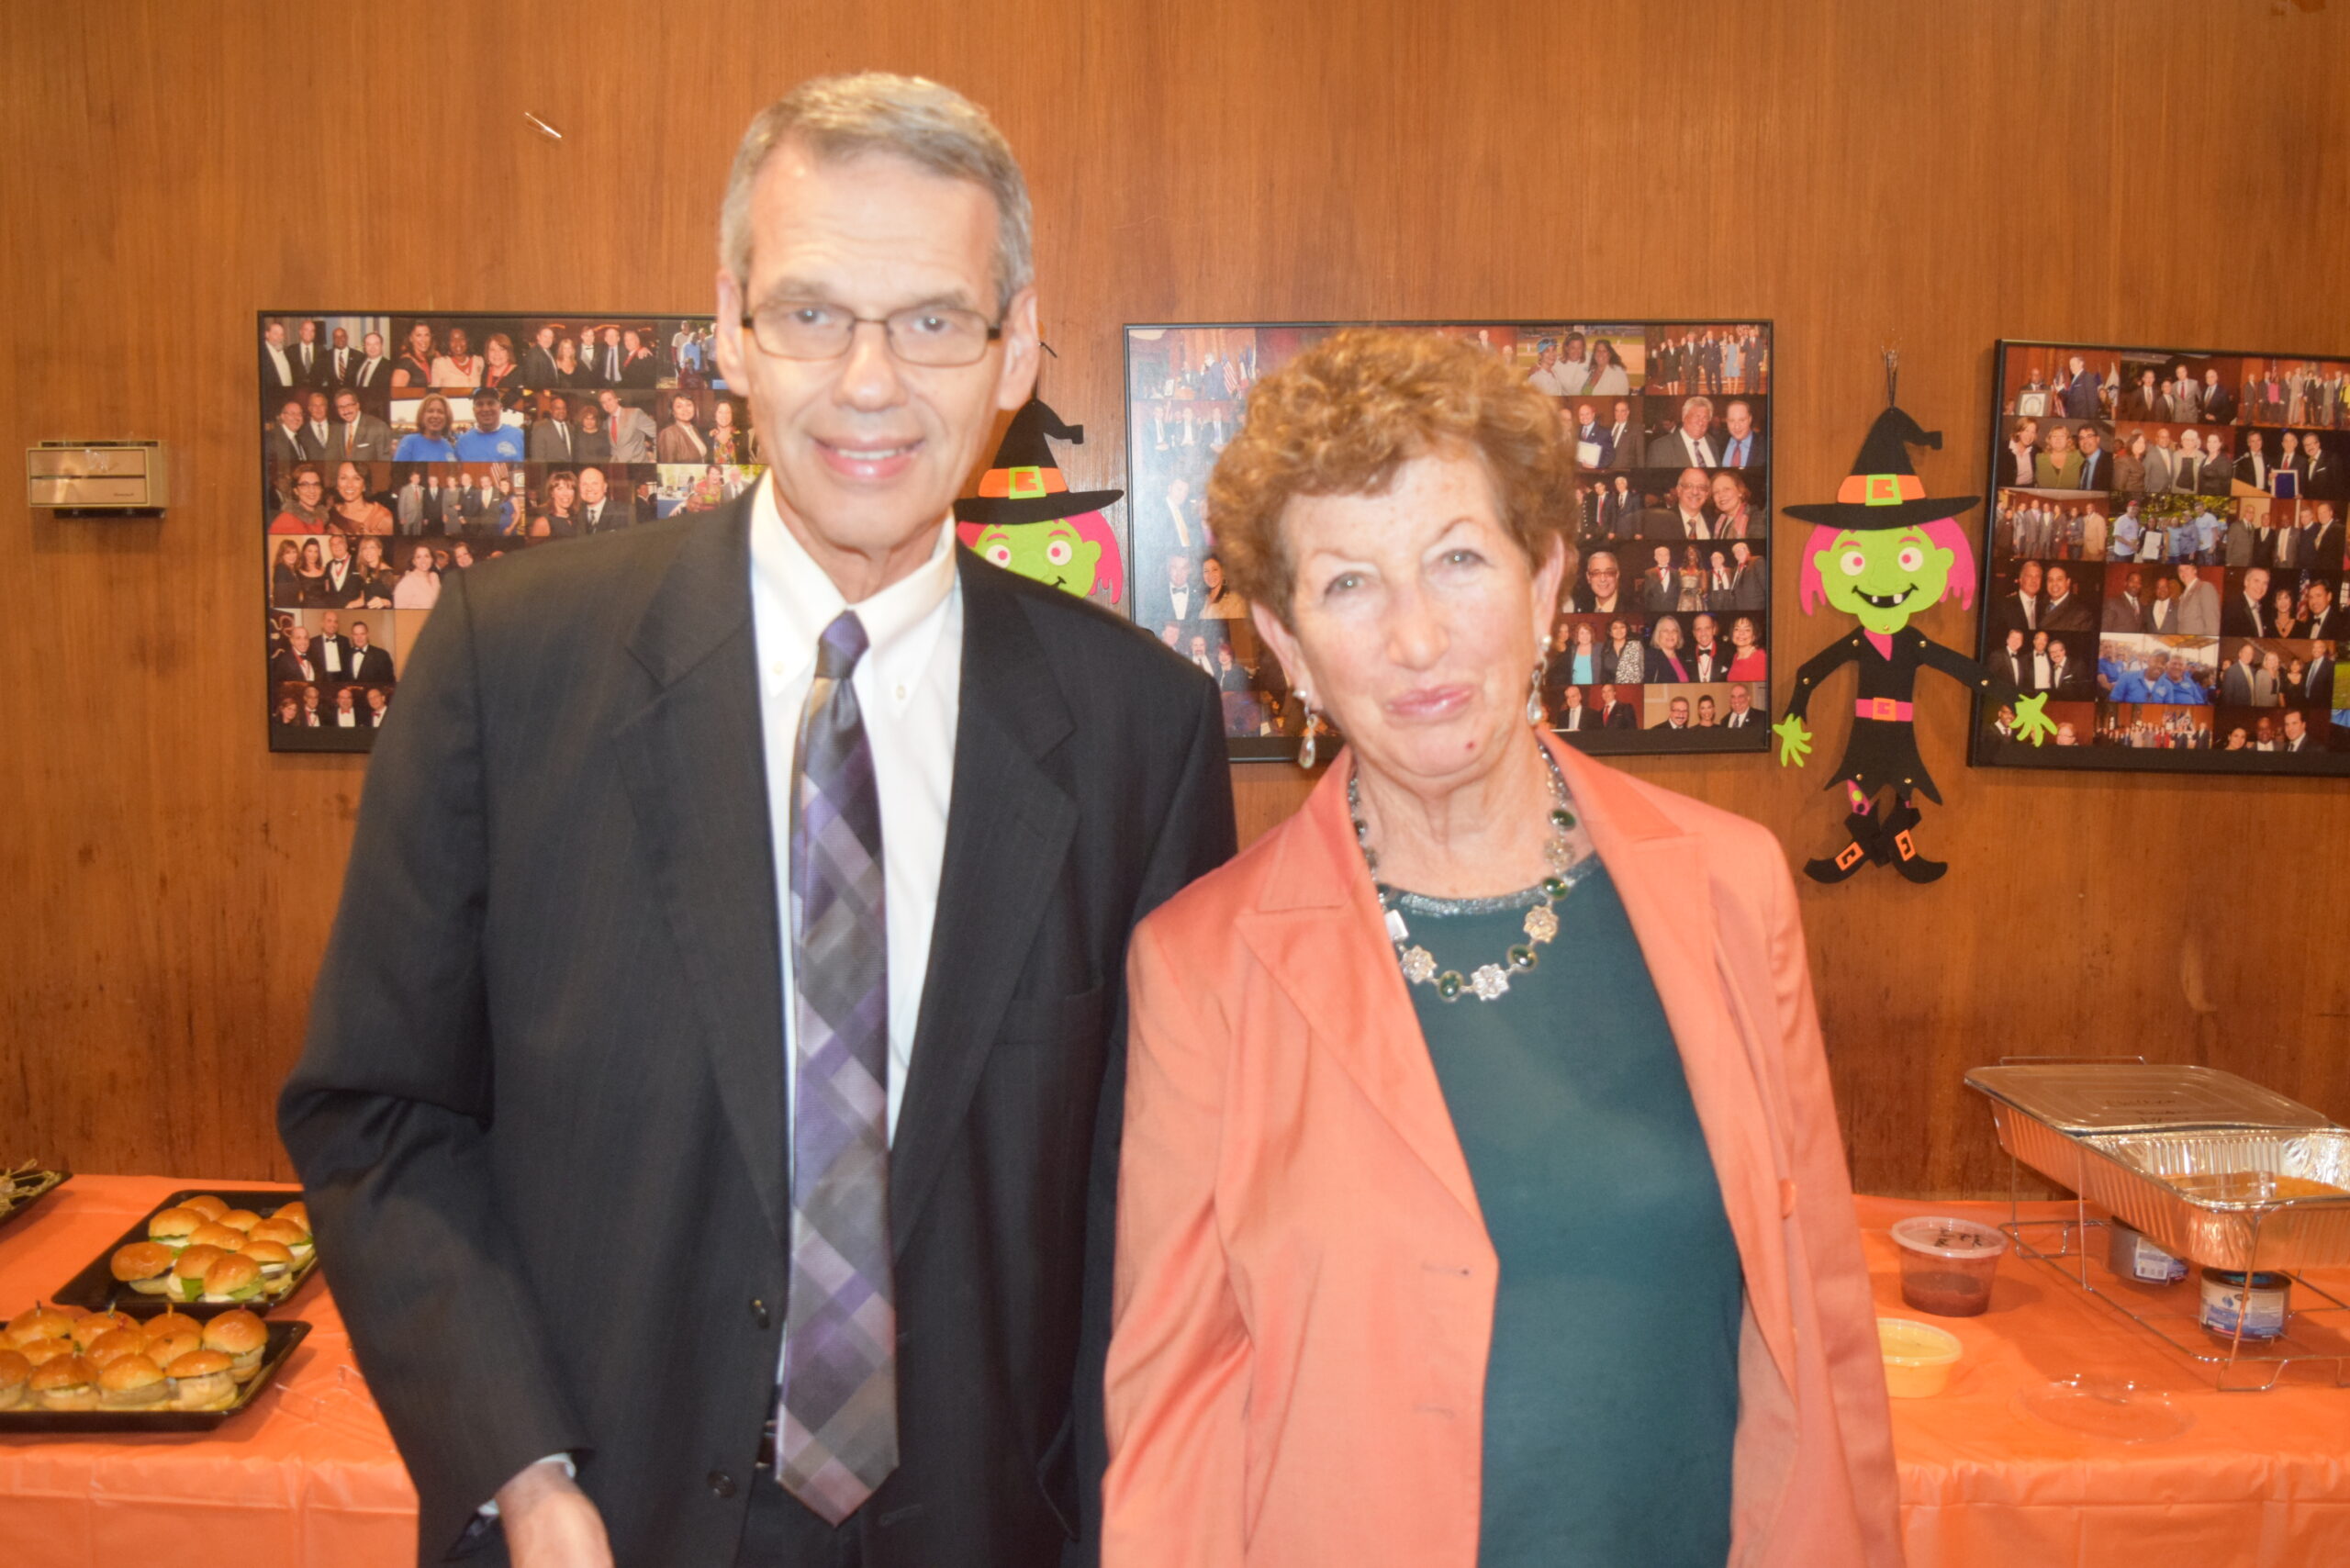 Hon. Lawrence Knipel, administrative judge of the Kings County Supreme Court, Civil Term, and Hon. Katherine Levine at BBA Halloween-themed fundraiser.